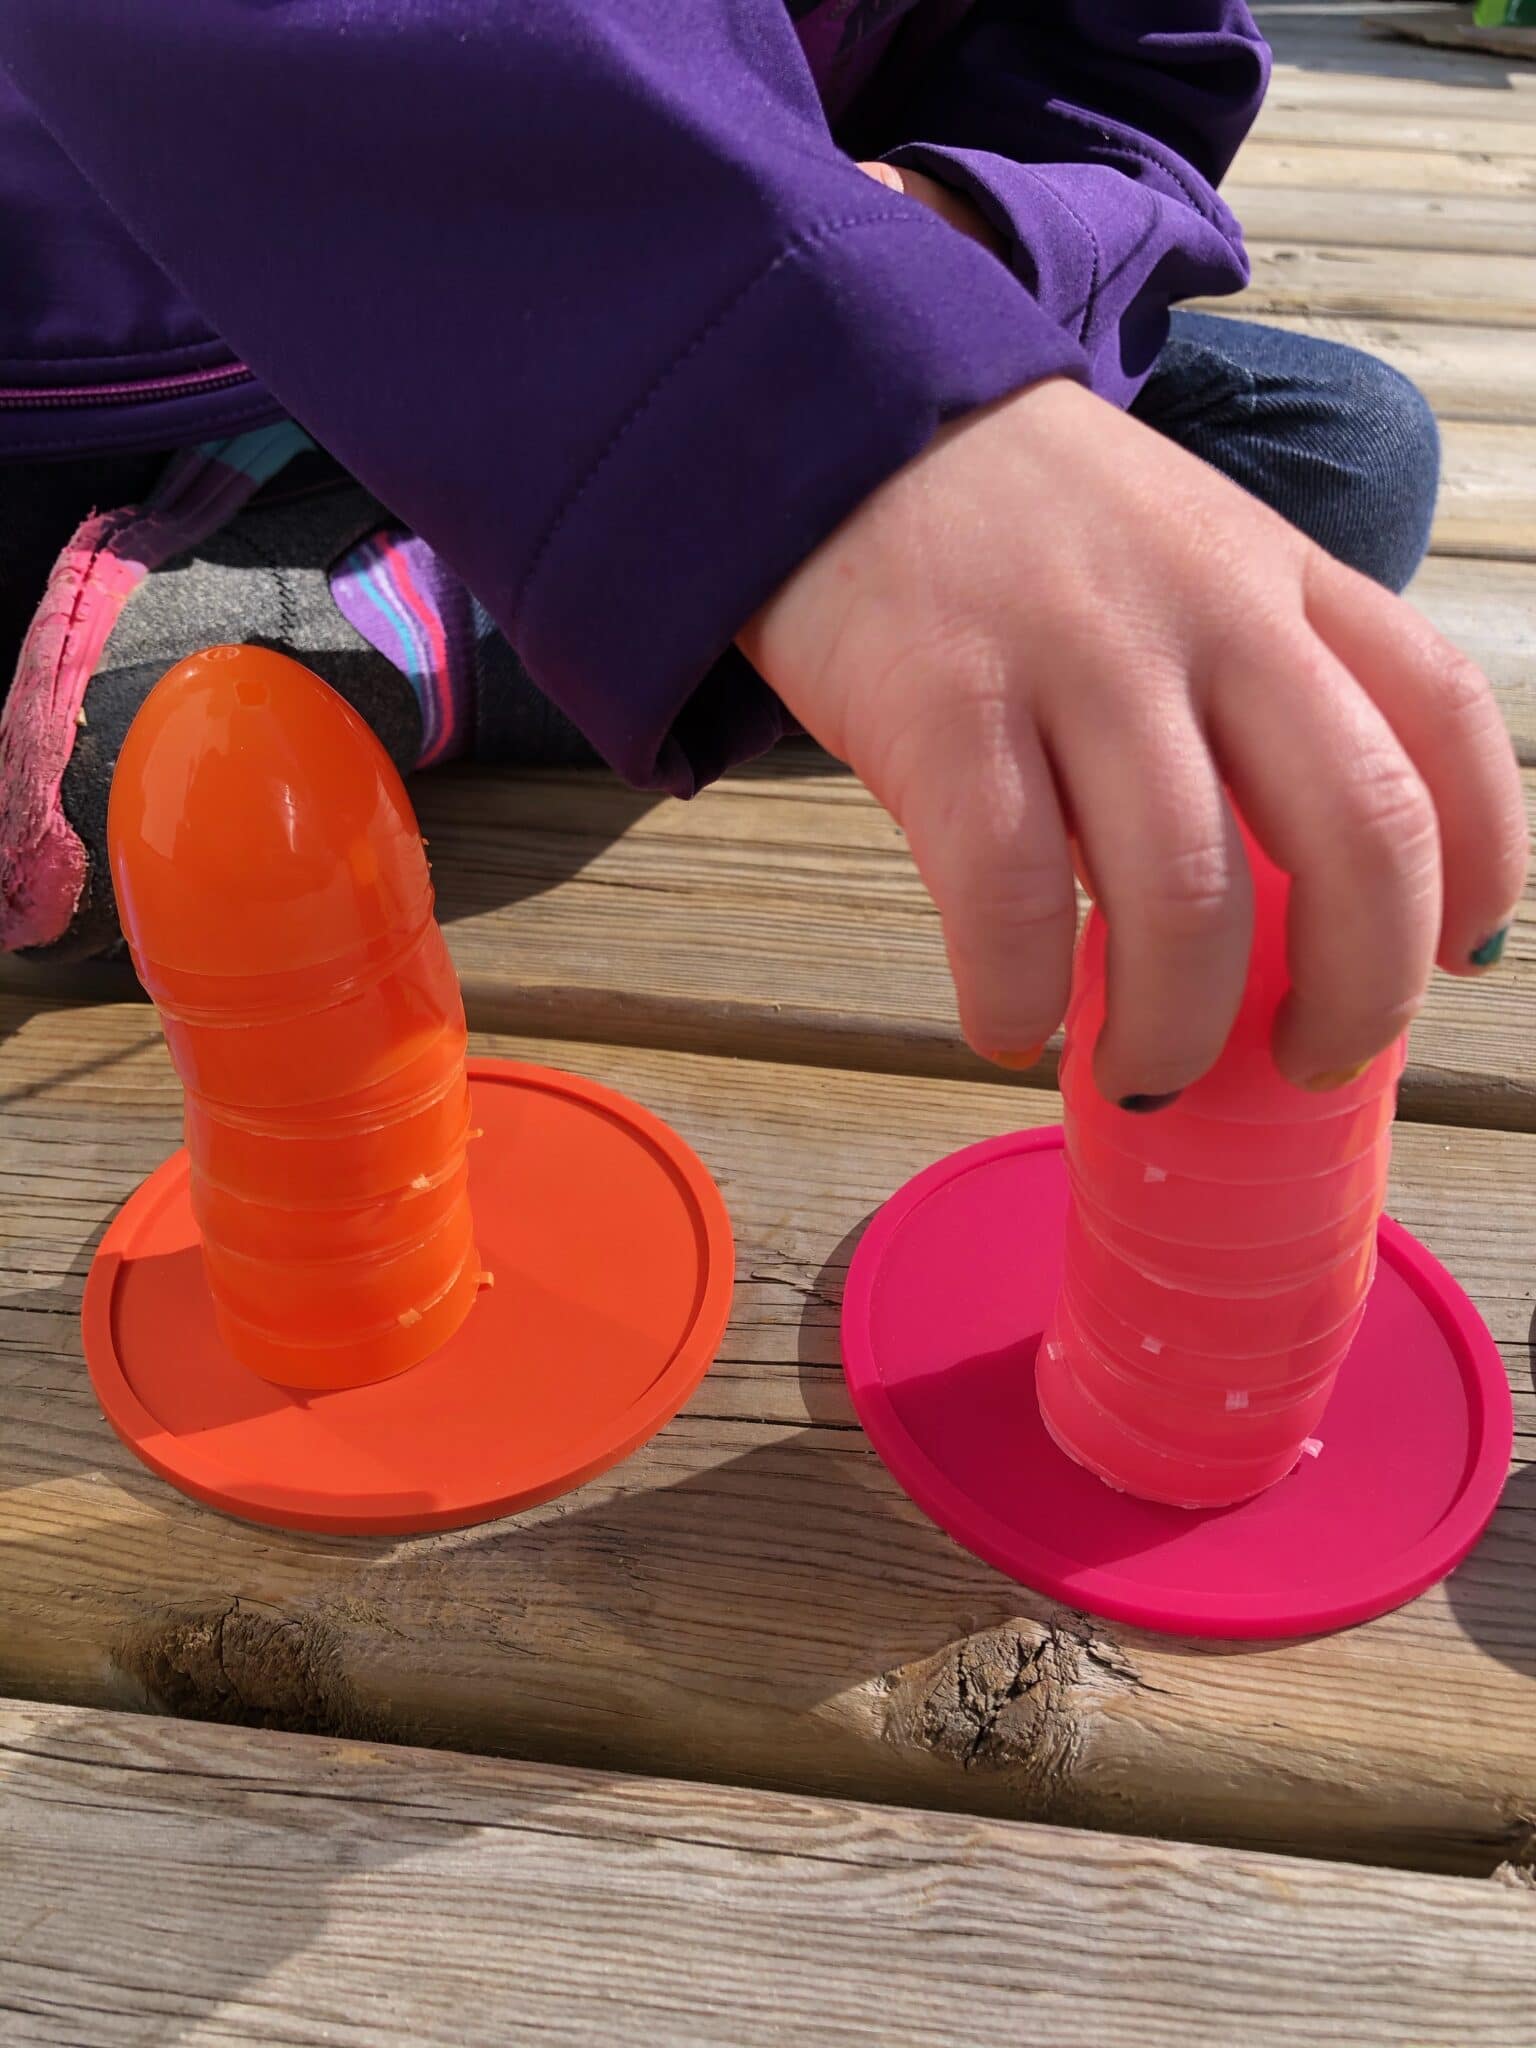 Give colorful plastic eggs a new purpose with these simple fine motor, gross motor, and learning activities that are perfect to do at home!